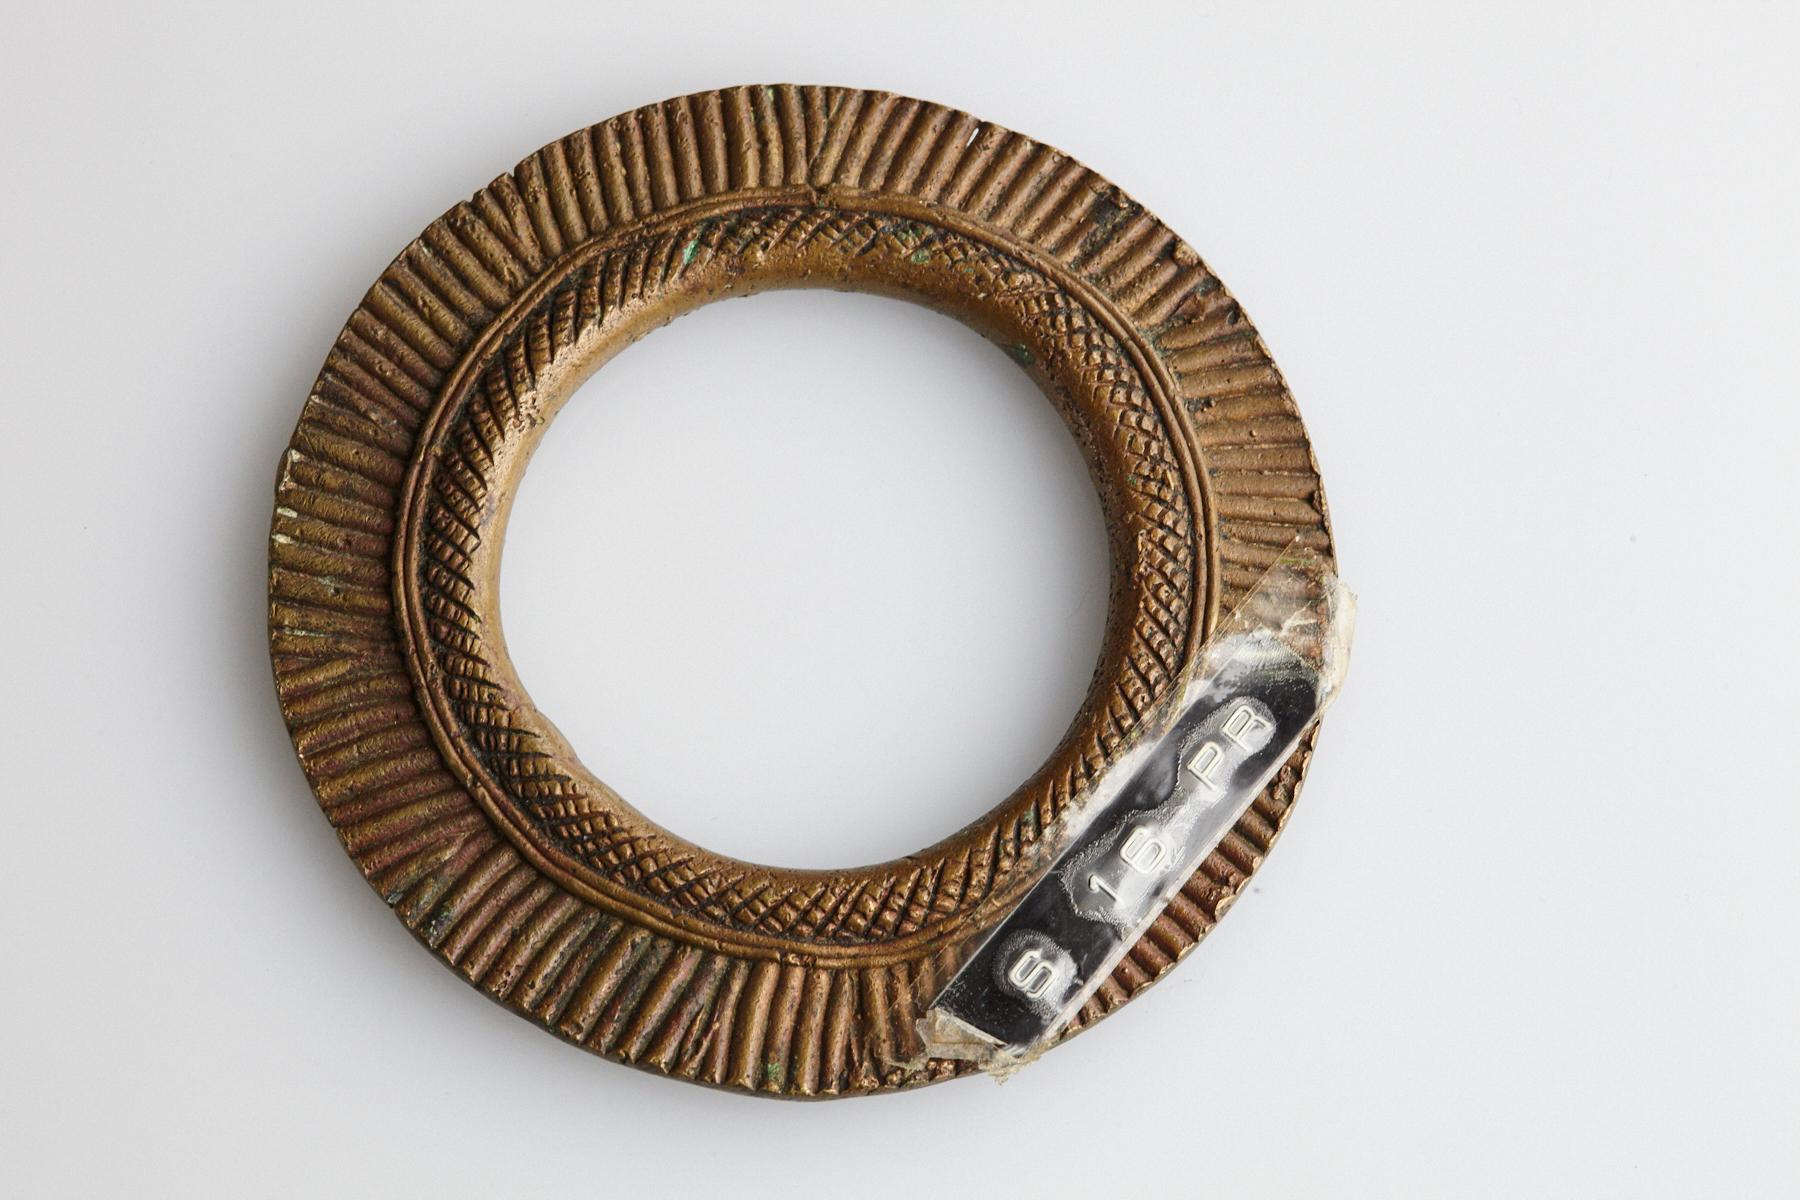 Early to mid-19th-century bronze currency bracelet / Manilla in circle form. Intricate graphical geometrical. This type of bracelet was worn/used by the Zaghawa People also called Béri People, an ethnic group primarily residing in southwestern